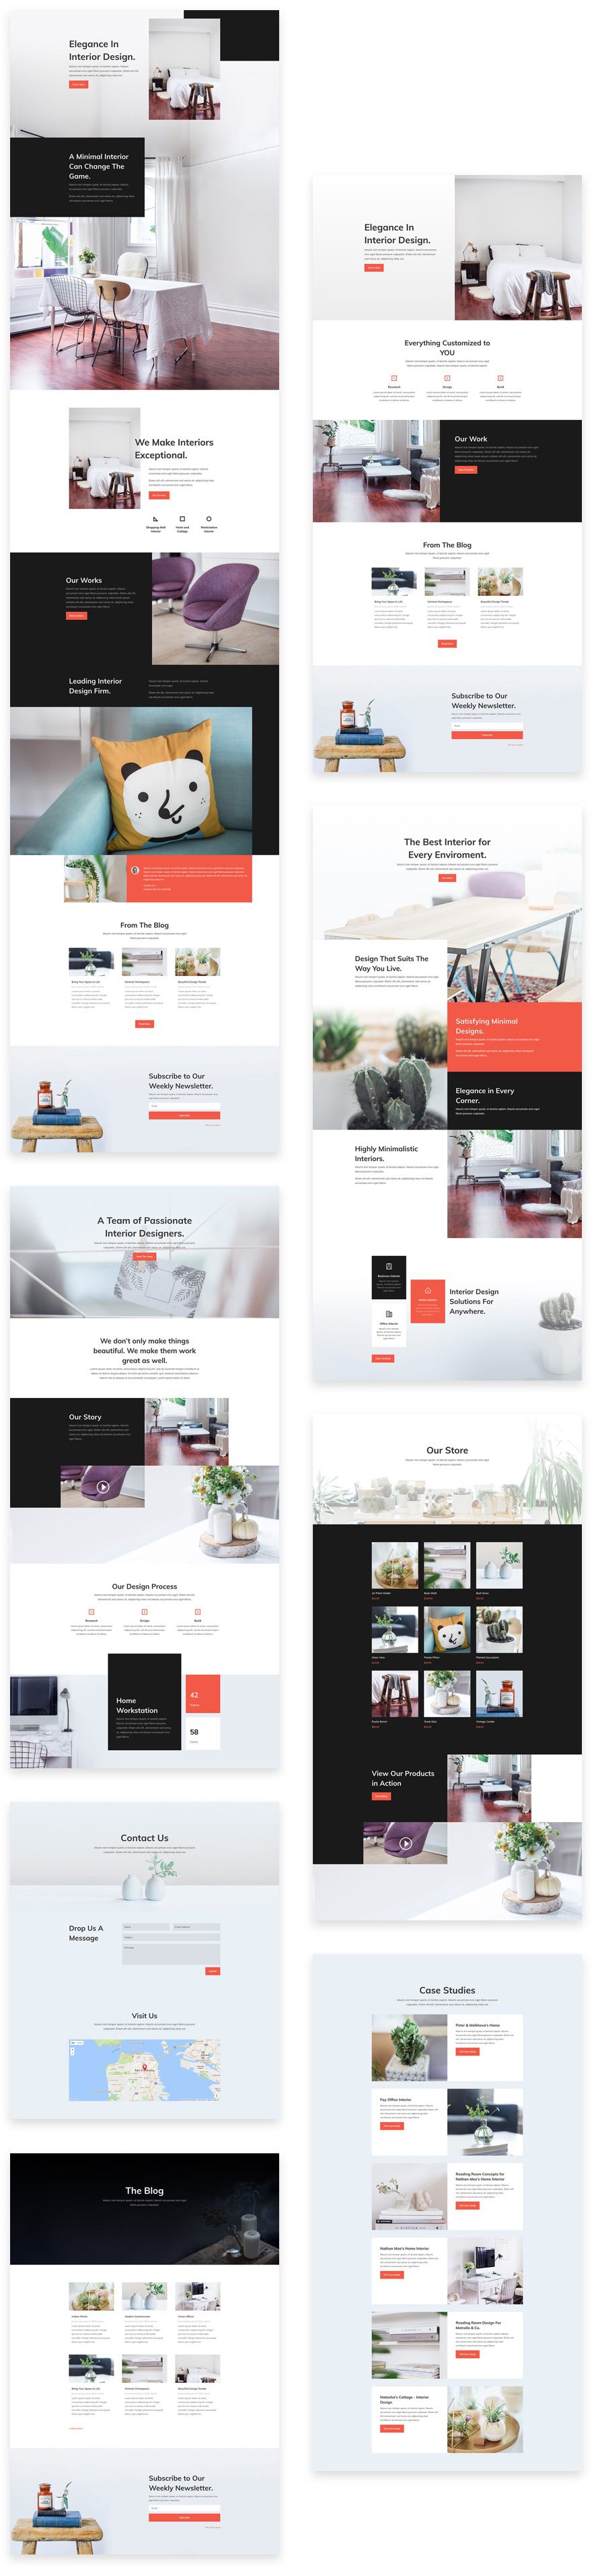 Download A Free Refreshing Interior Design Layout Pack For